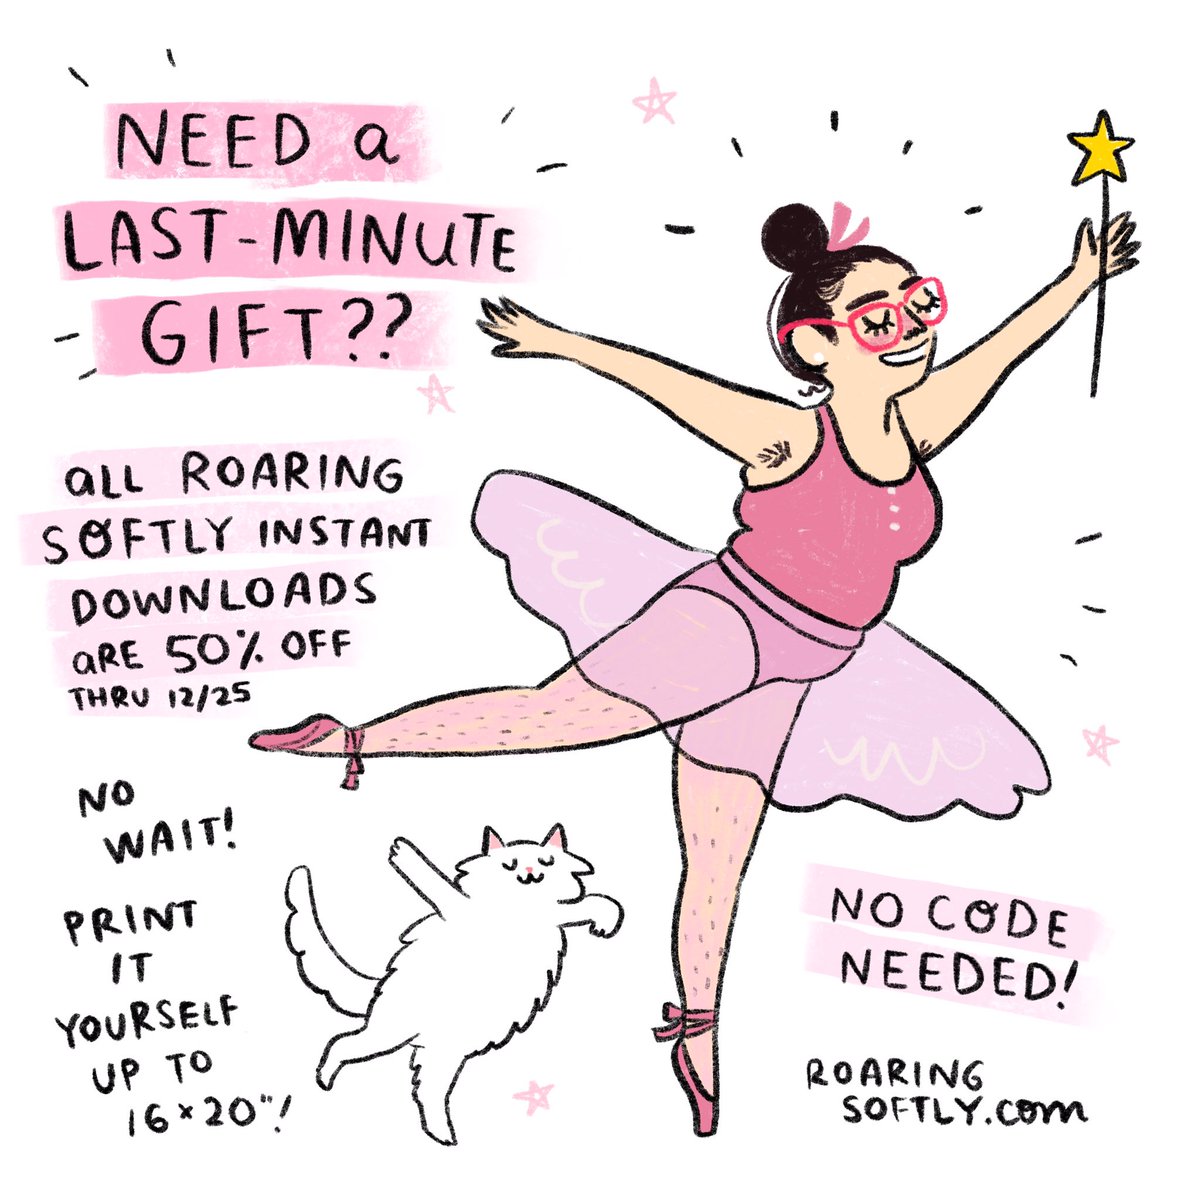 Need a last minute gift?  70+ illustrations of mine are available as instant downloads to print yourself AND they're all 50% off thru Christmas!  No code needed ✨
https://t.co/c1ygf9giwt 